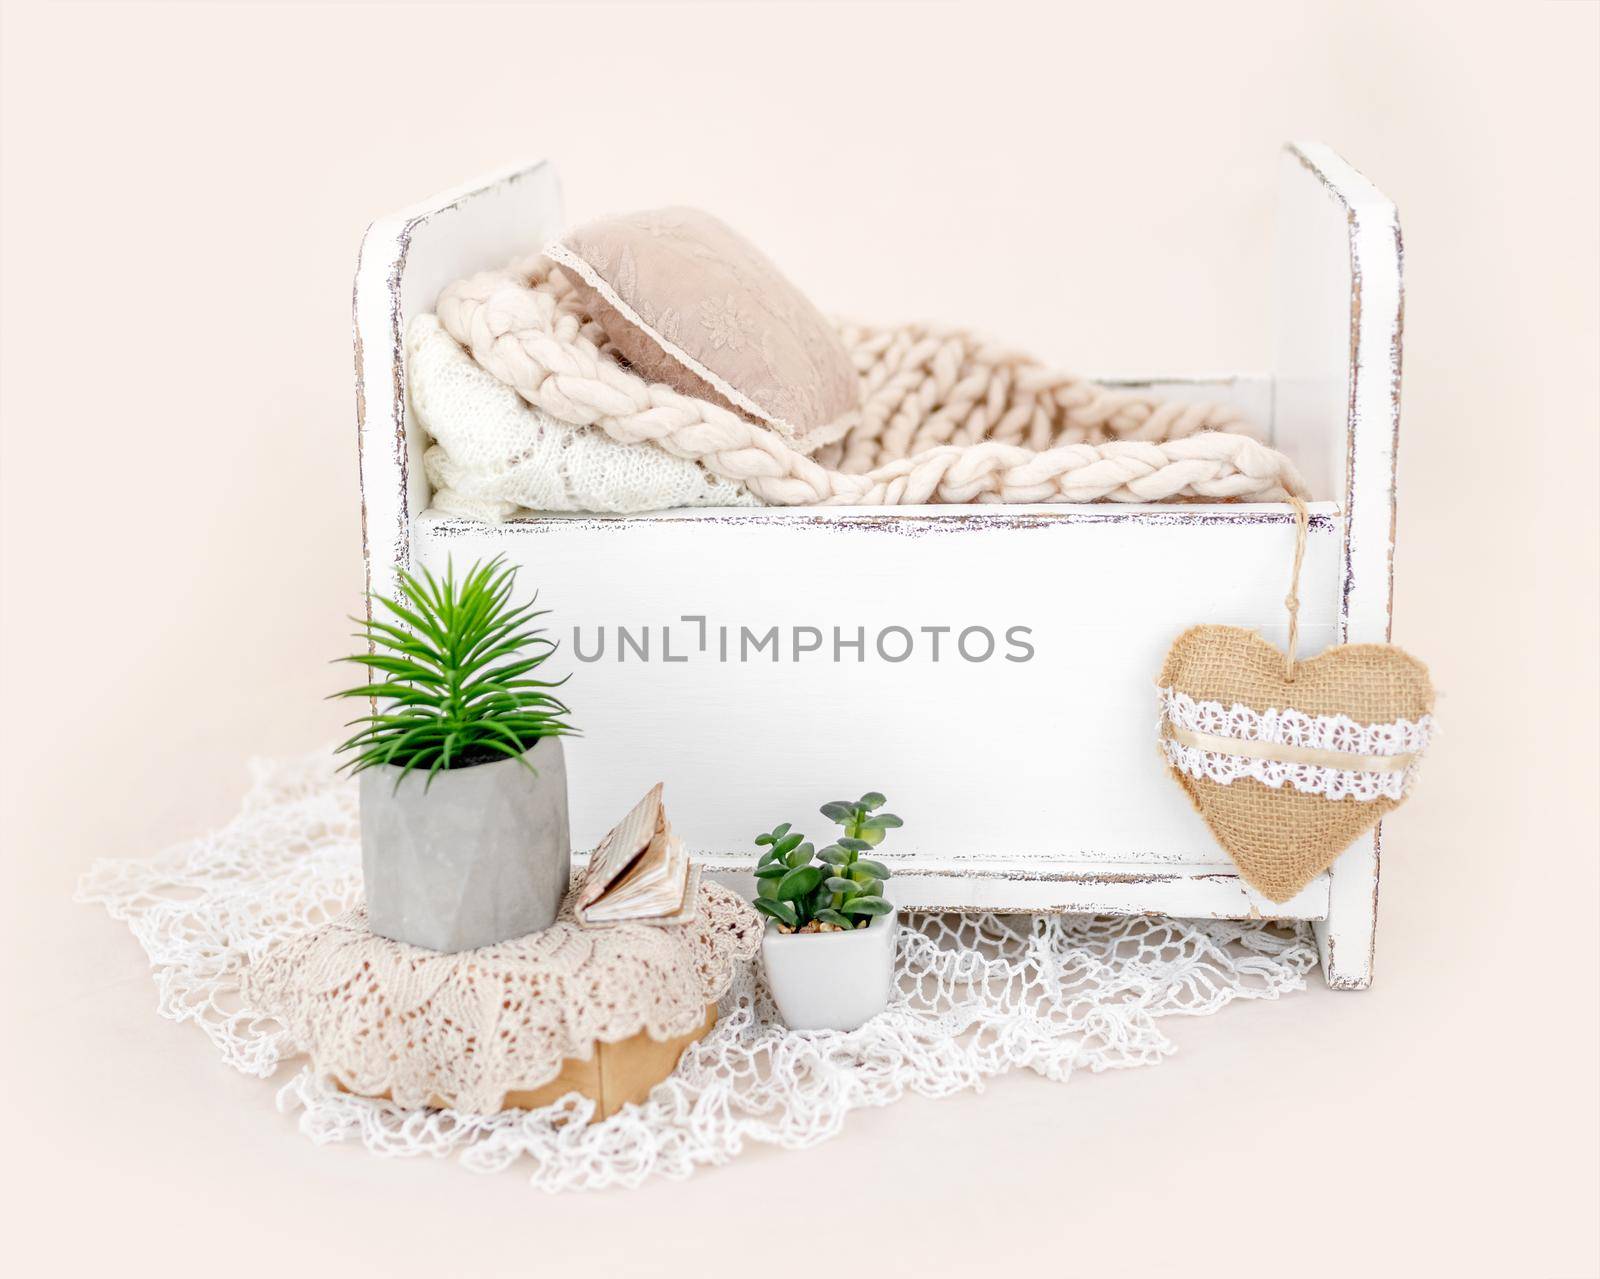 Beautiful white wooden bed furniture for newborn studio photoshoot with fur, pillow decoration. Tiny designed place for infant photo isolated on light pink background